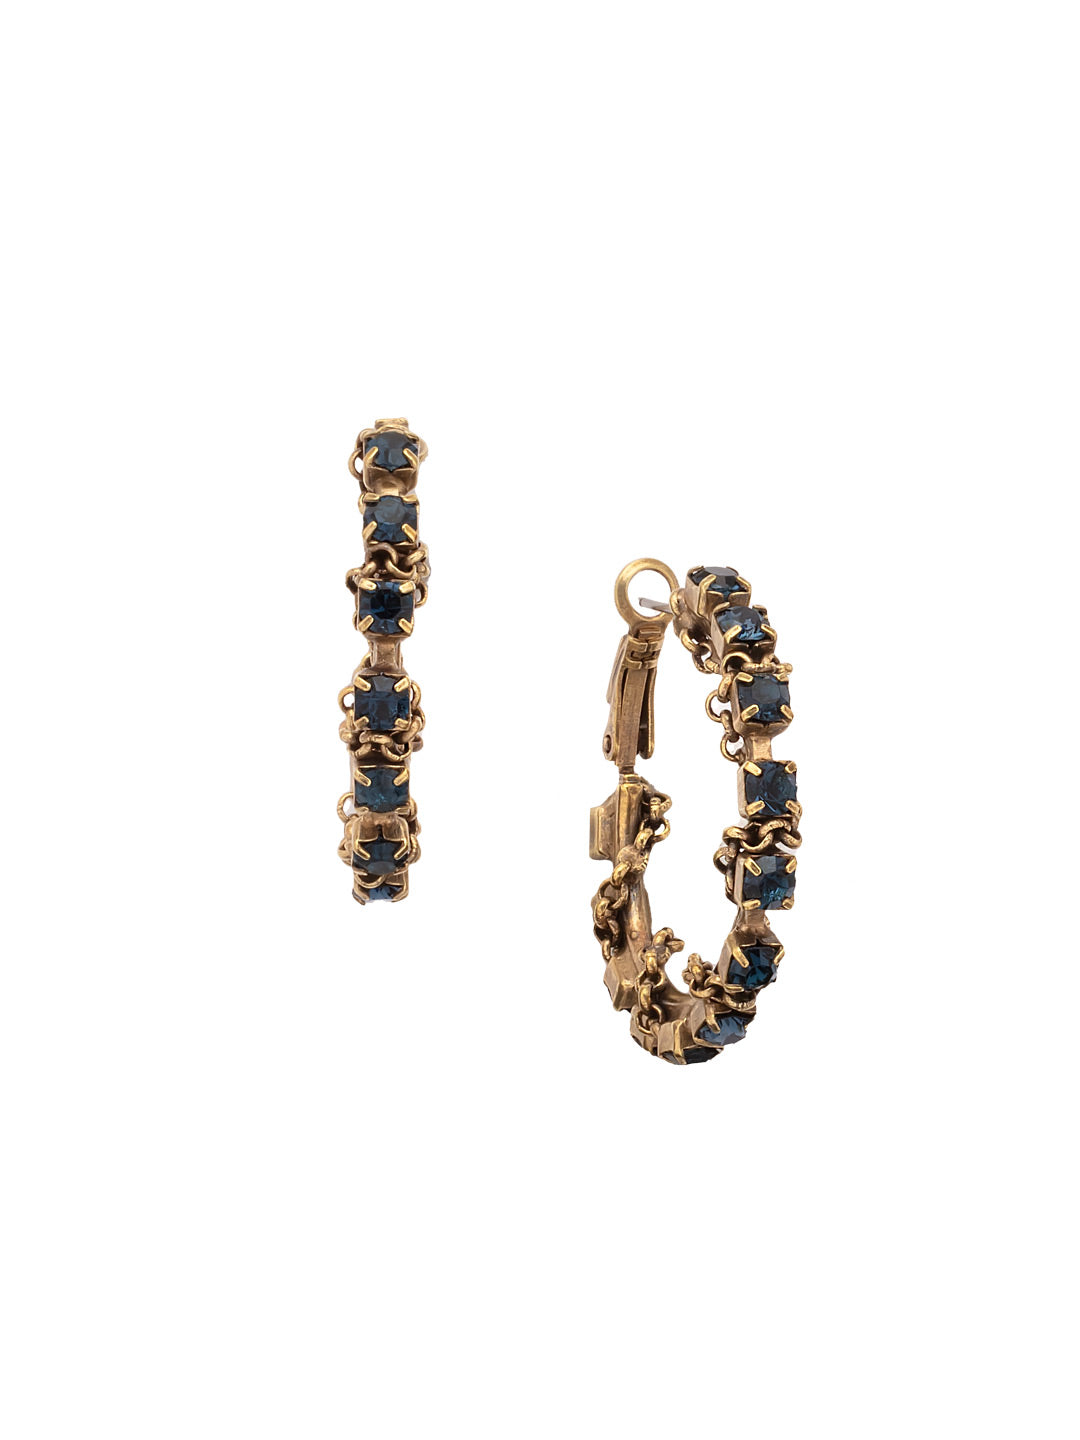 Brandi Classic Hoop Earring - EFC63AGVBN - <p>The Brandi Classic Hoop Earrings feature heavier classic crystals on a hoop, elevated with a braided chain design. From Sorrelli's Venice Blue collection in our Antique Gold-tone finish.</p>